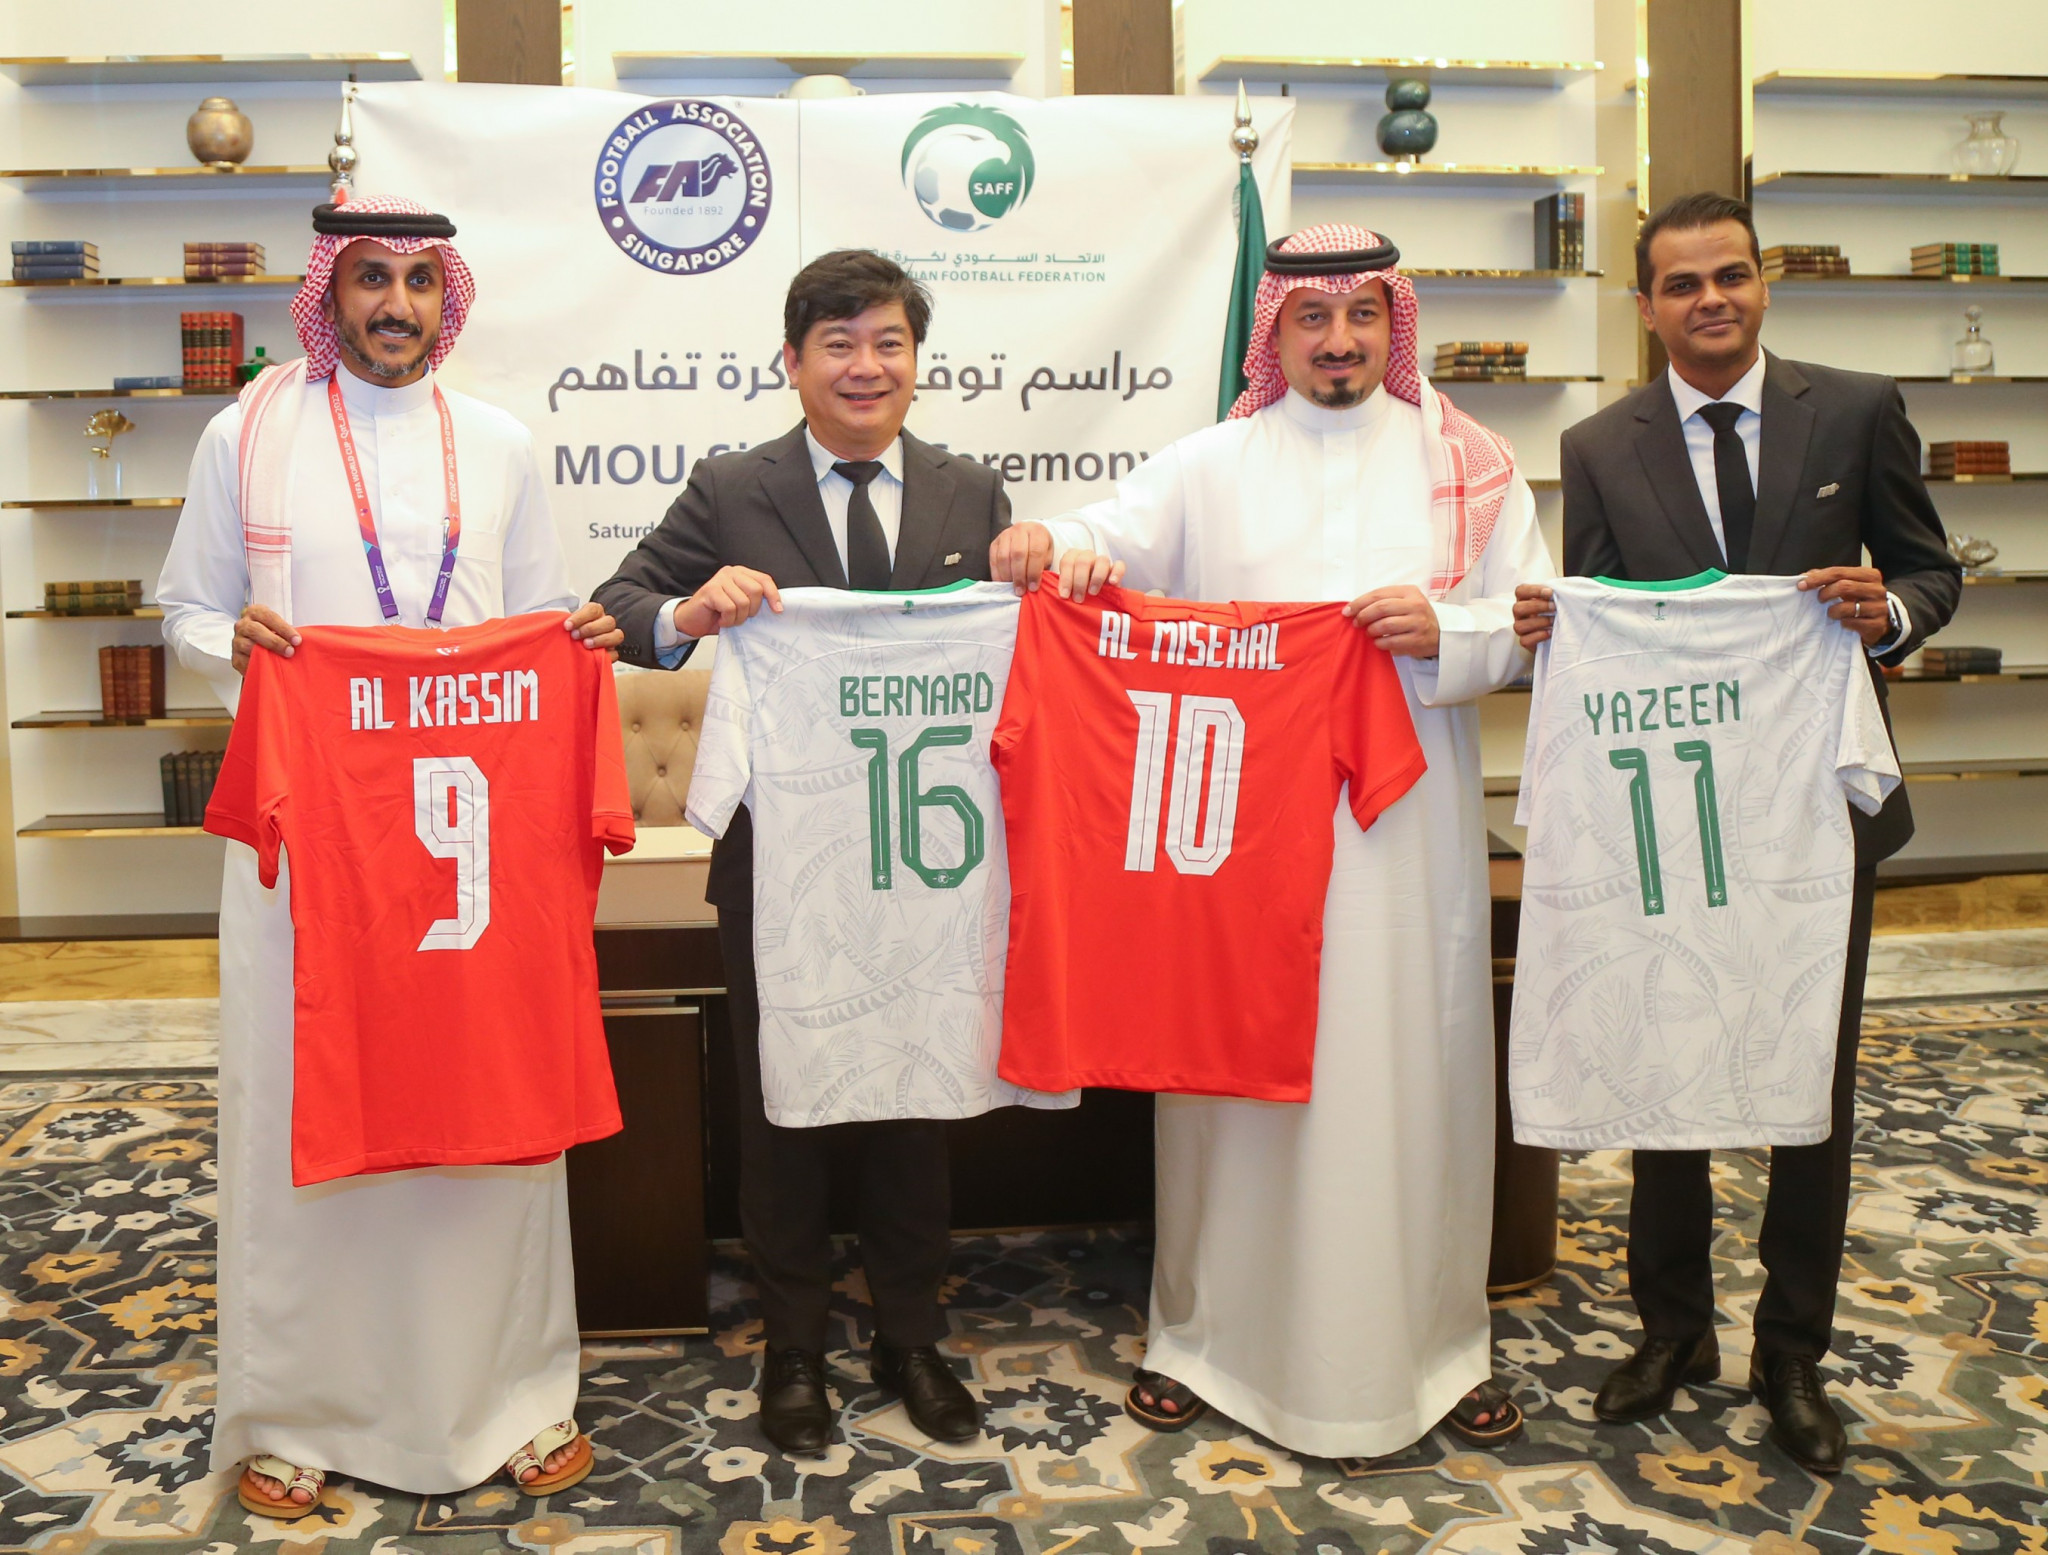 Singapore and Saudi Arabia signed the agreement yesterday ©SAFF